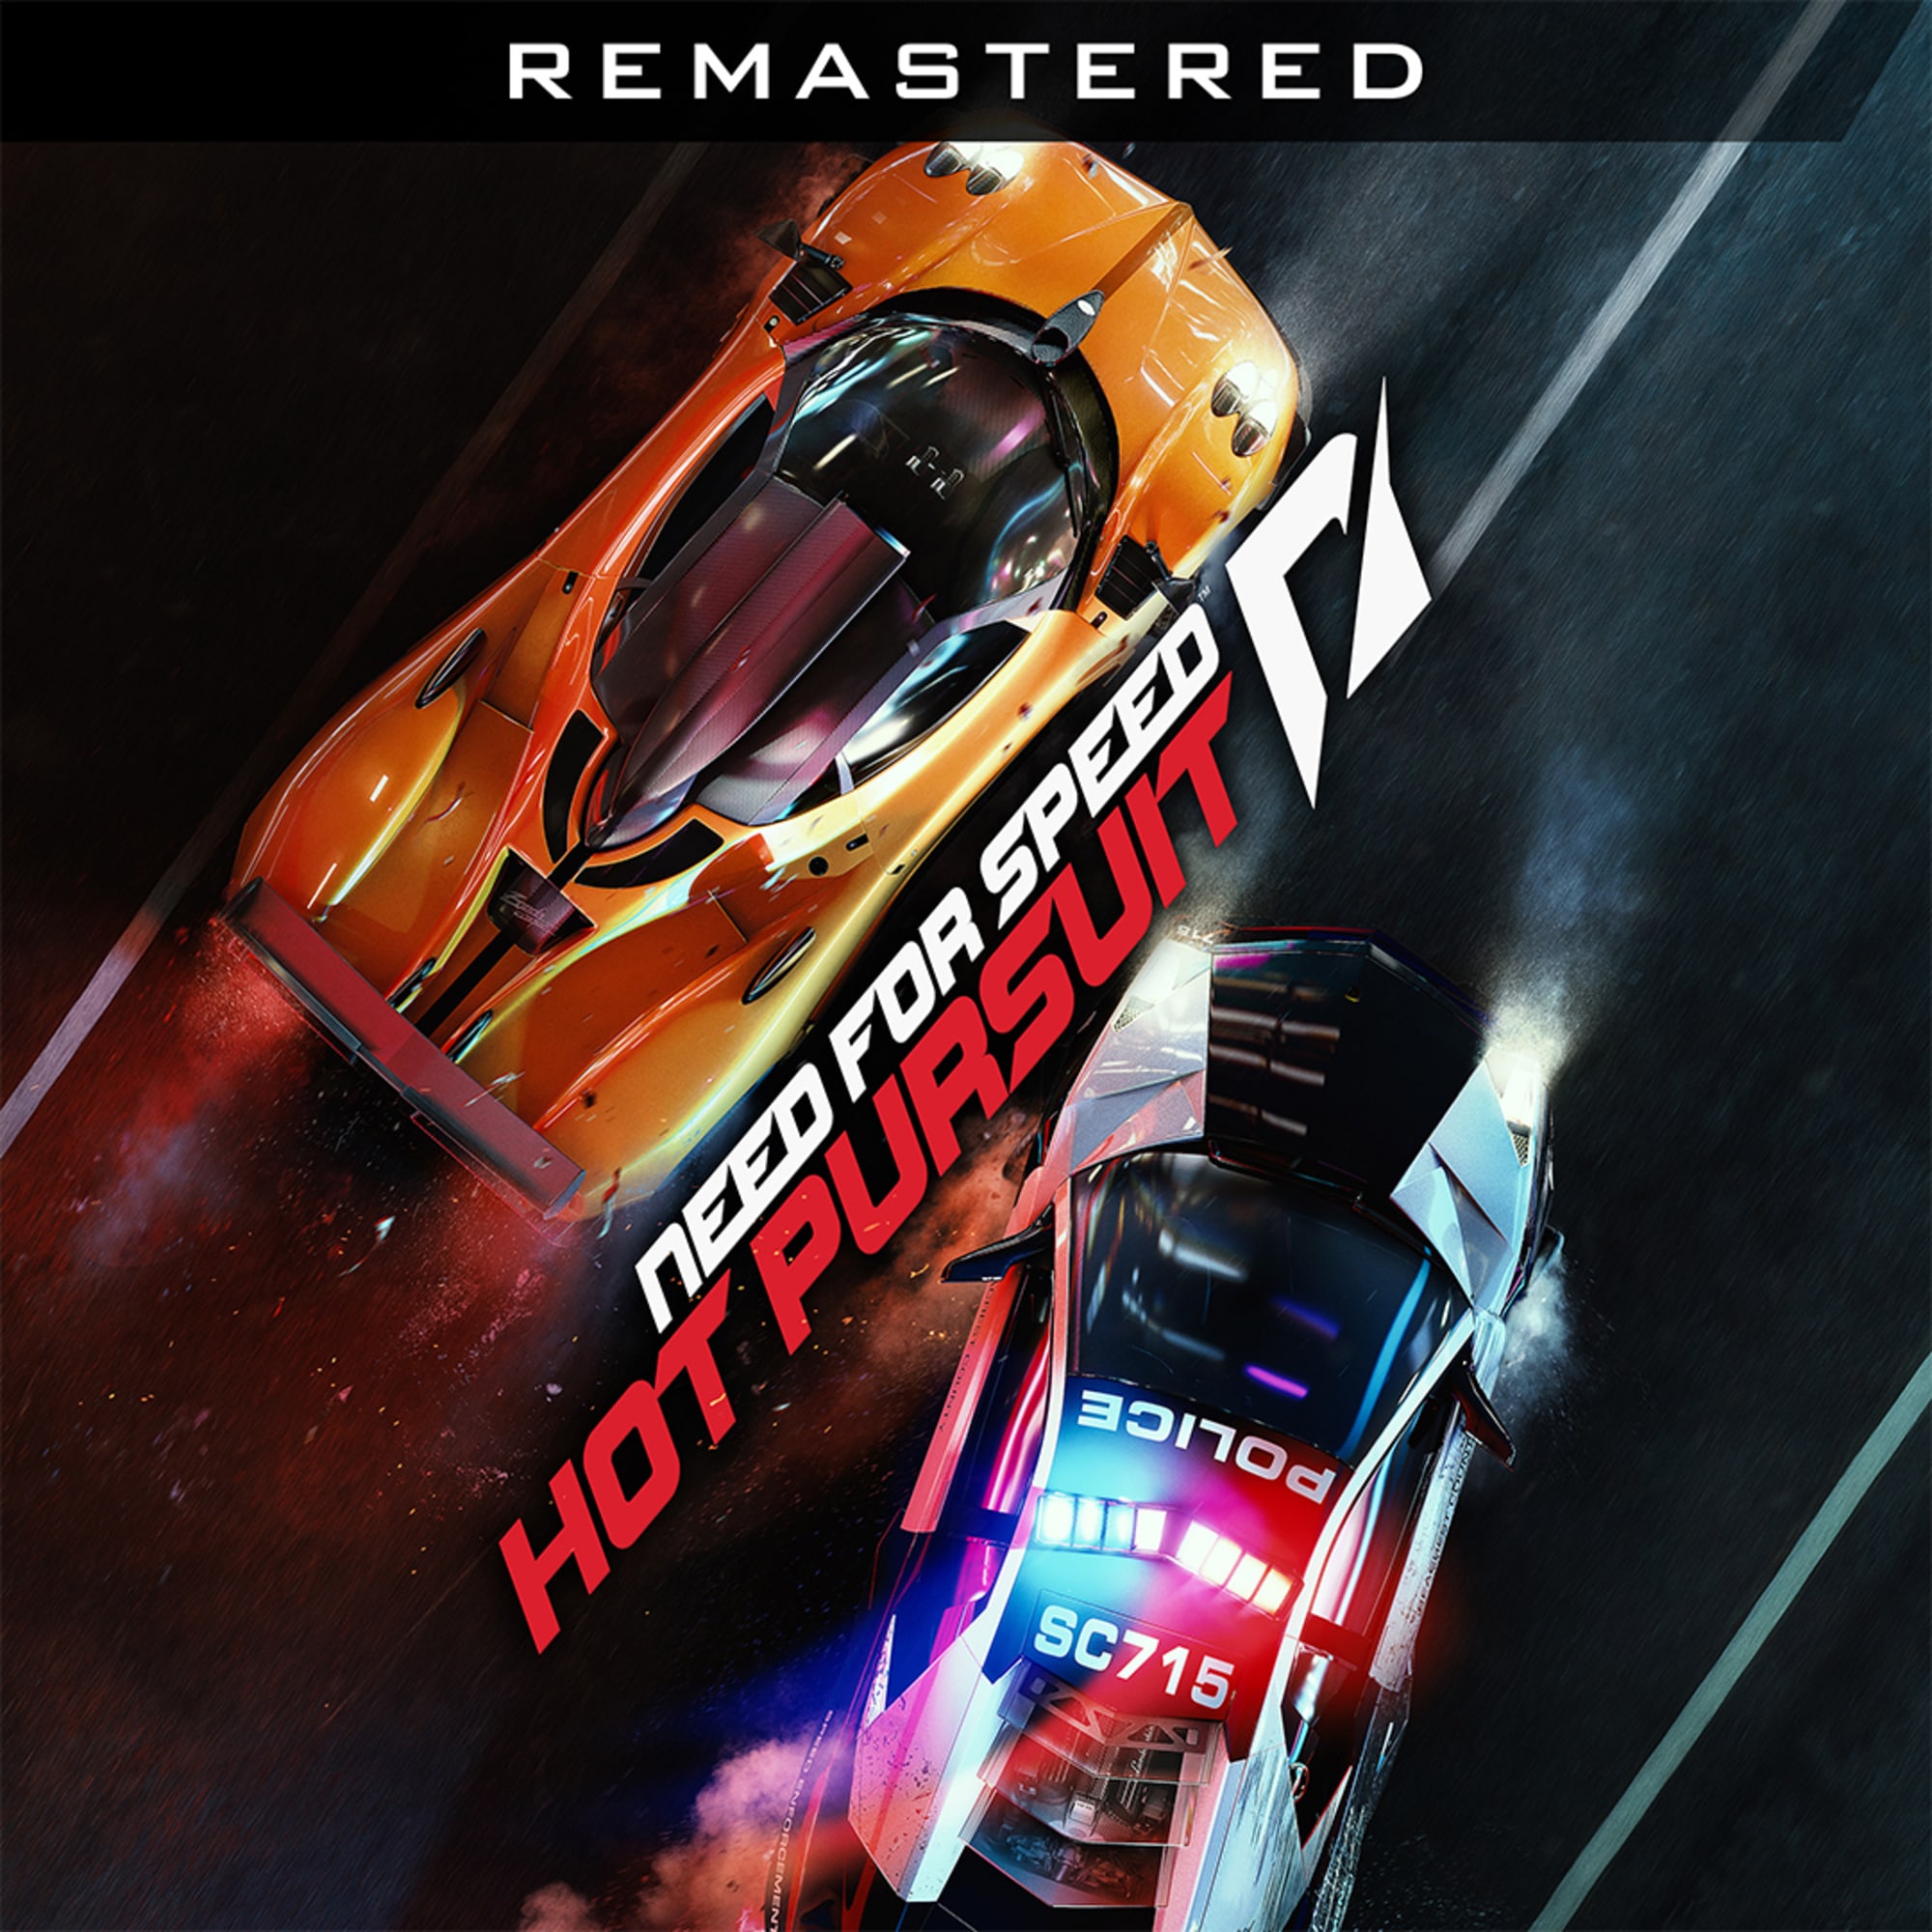 need for speed hot pursuit remastered multiplayer offline